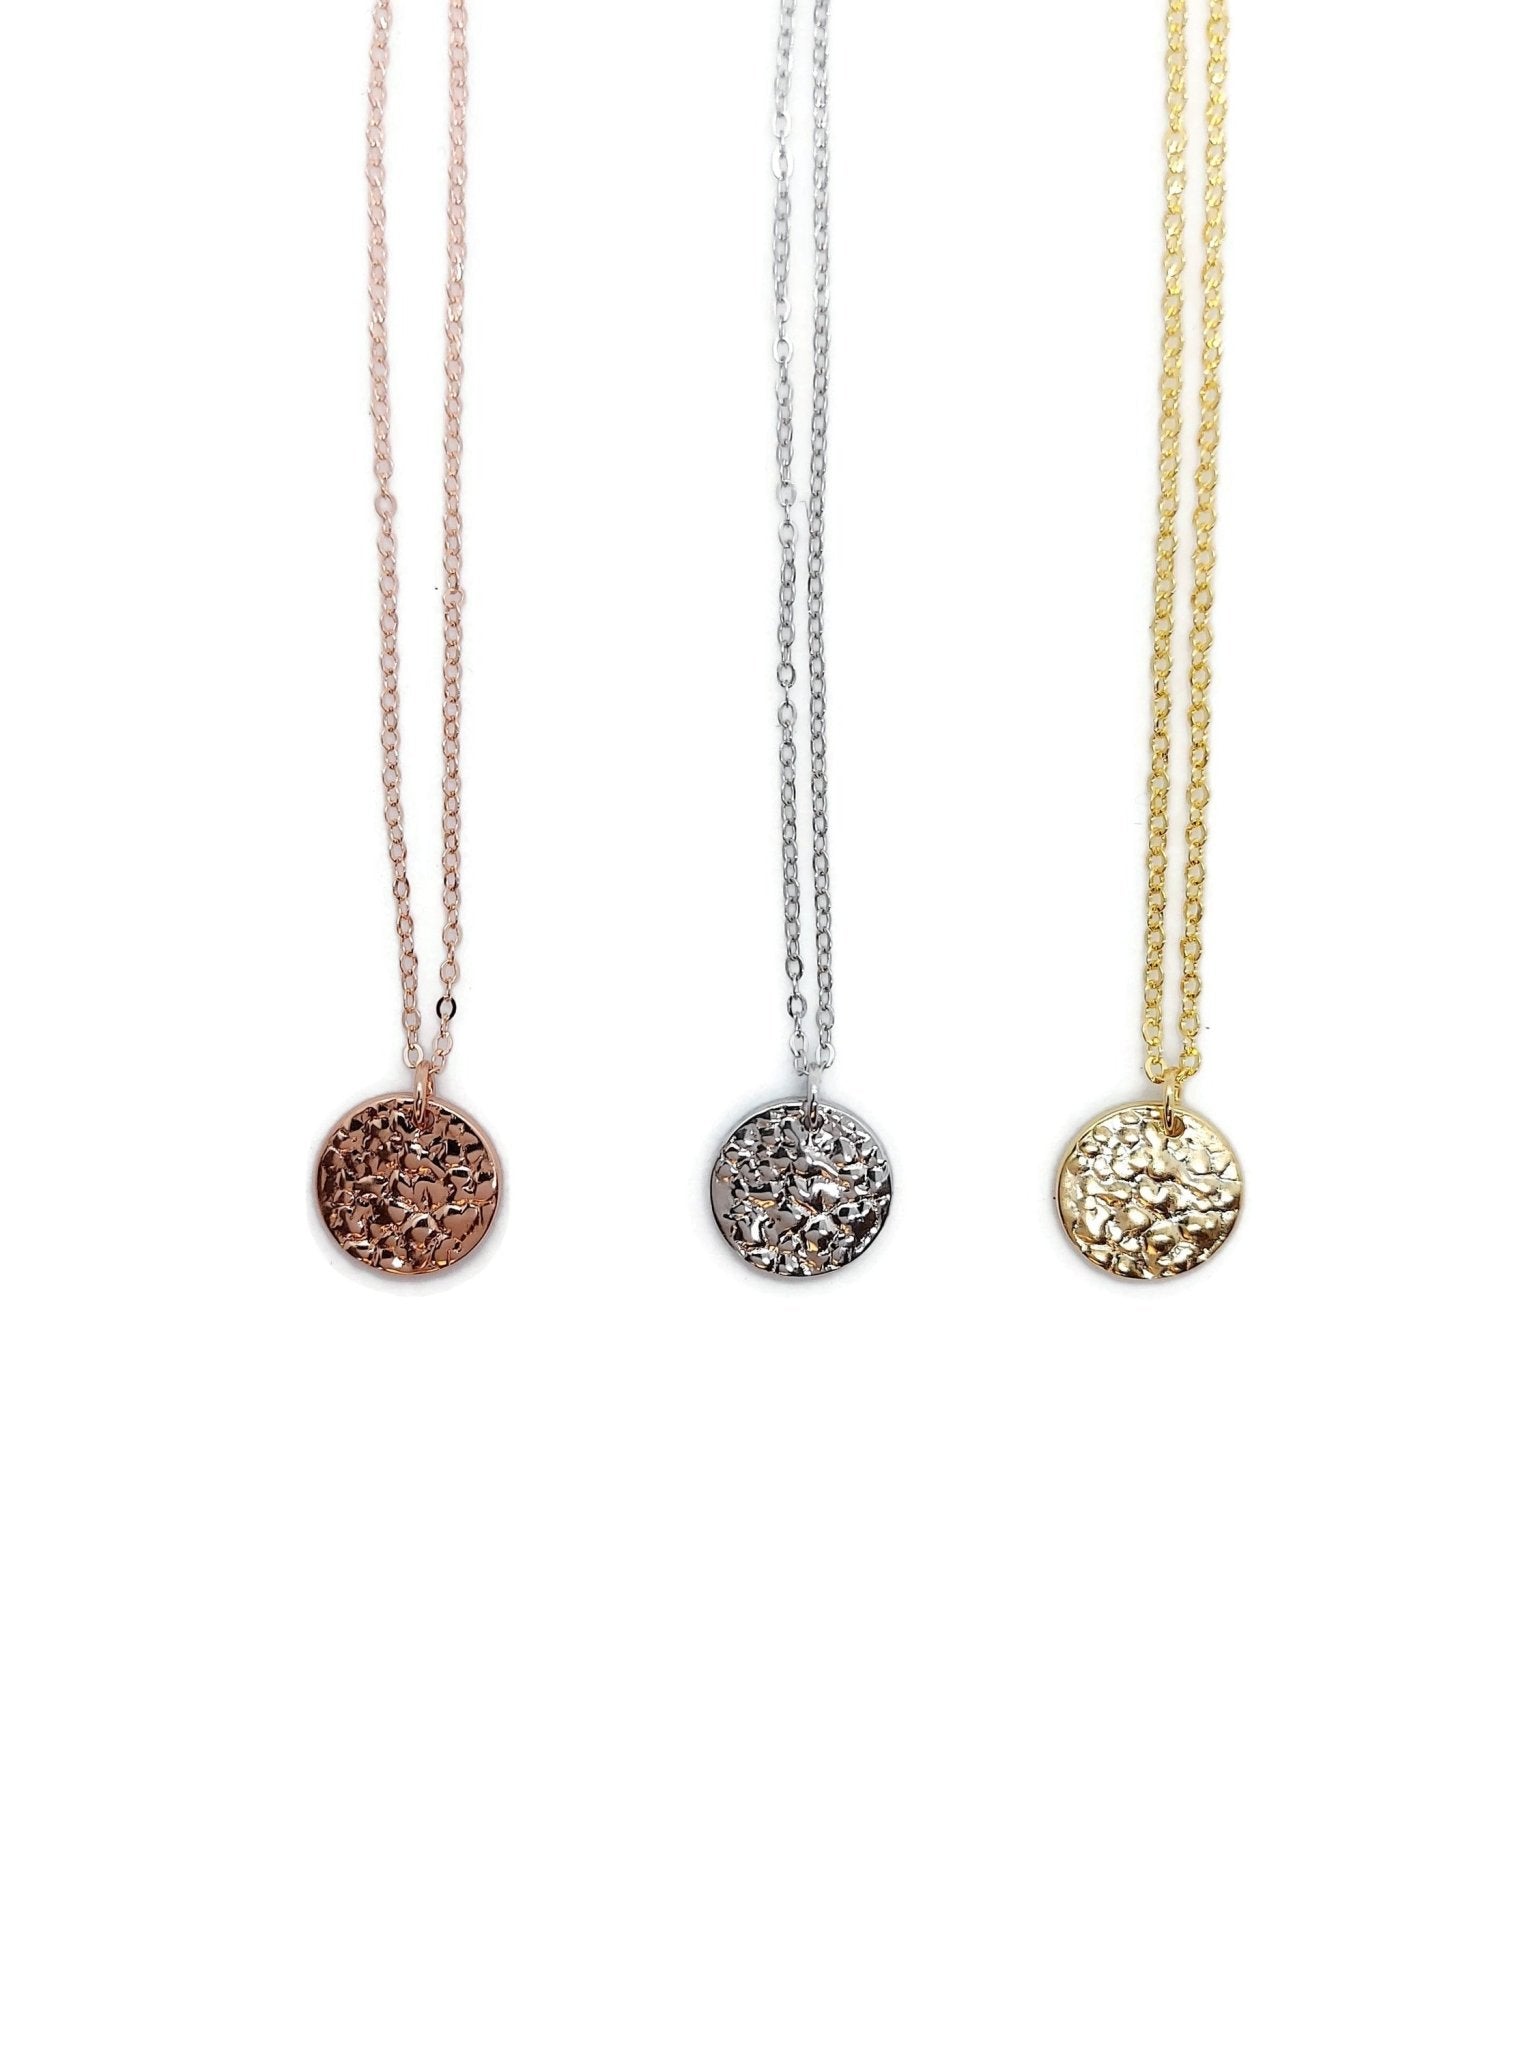 Rose gold, silver, yellow gold Sol Textured Small Circle Pendant Necklaces on white background